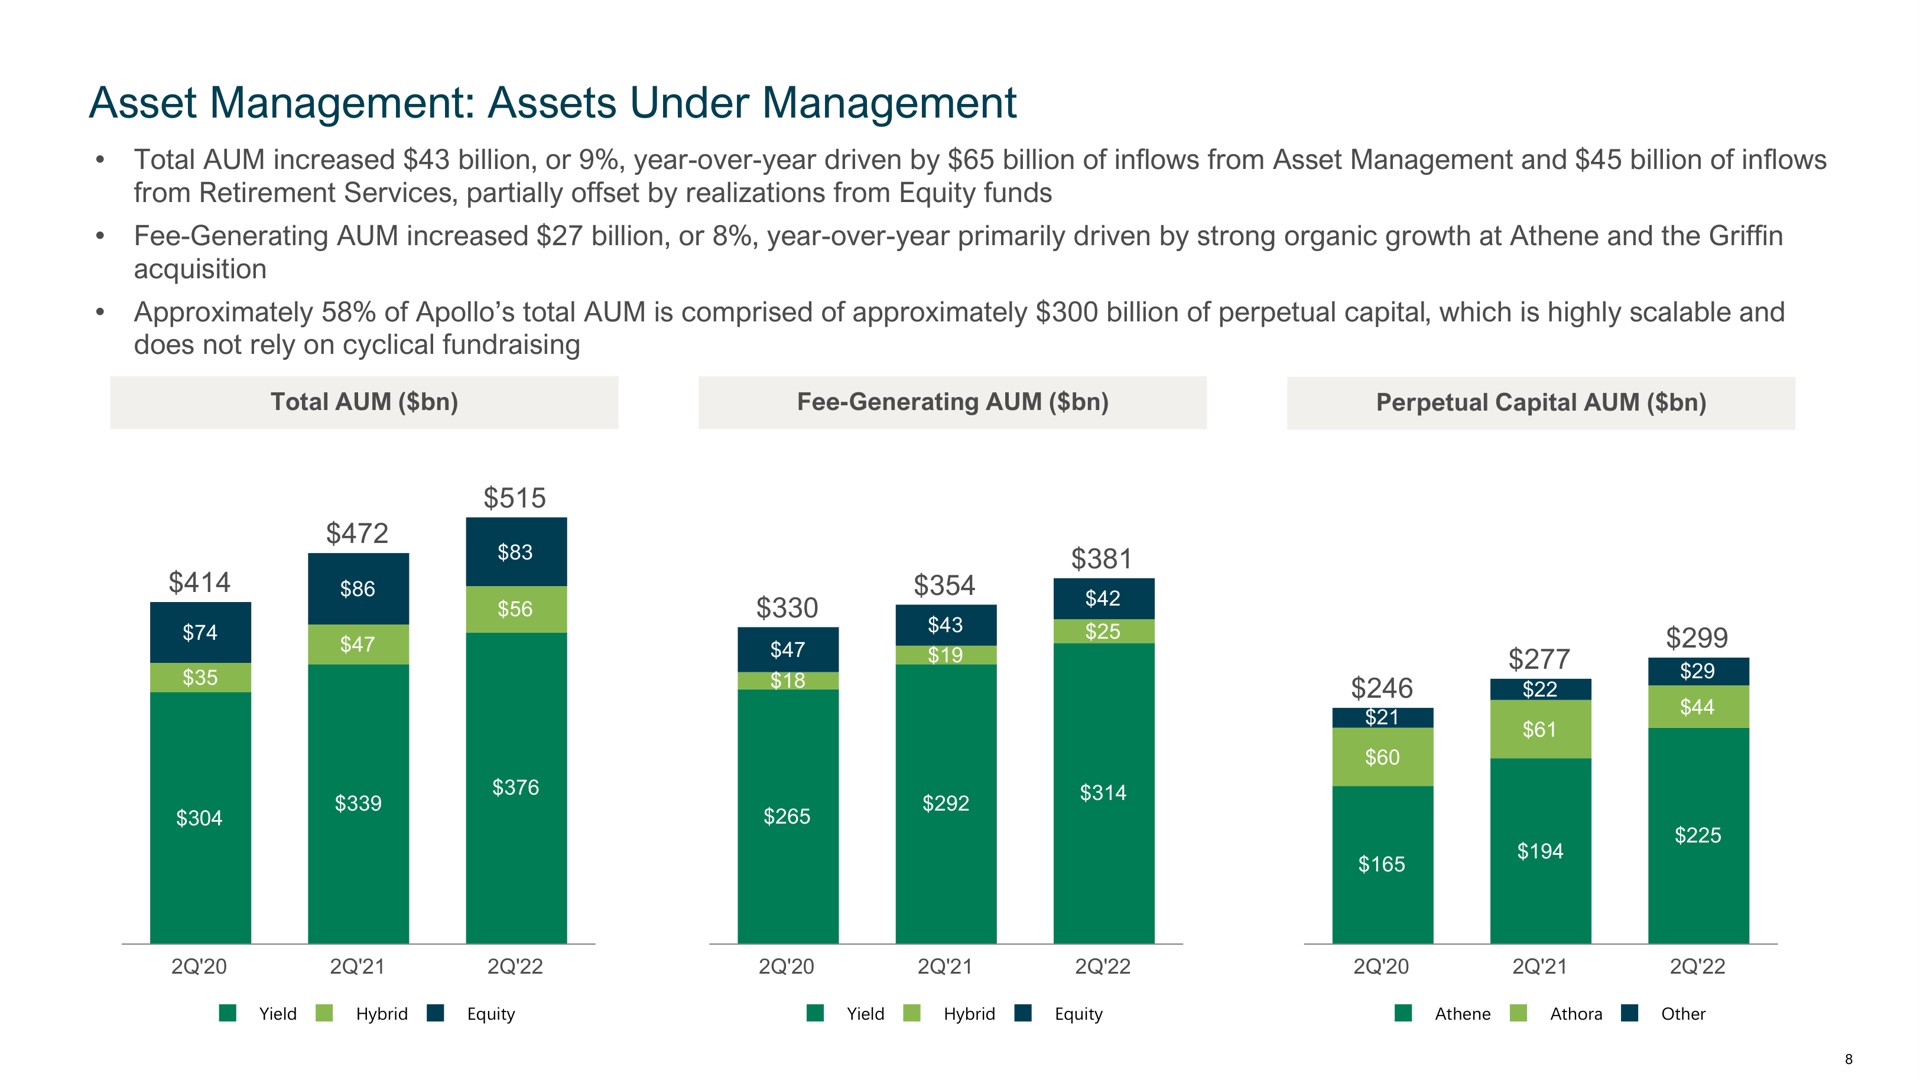 asset management assets under management total aum increased billion or year over year driven by billion of inflows from asset management and billion of inflows from retirement services partially offset by realizations from equity funds fee generating aum increased billion or year over year primarily driven by strong organic growth at and the griffin acquisition approximately of total aum is comprised of approximately billion of perpetual capital which is highly scalable and does not rely on cyclical | Apollo Global Management